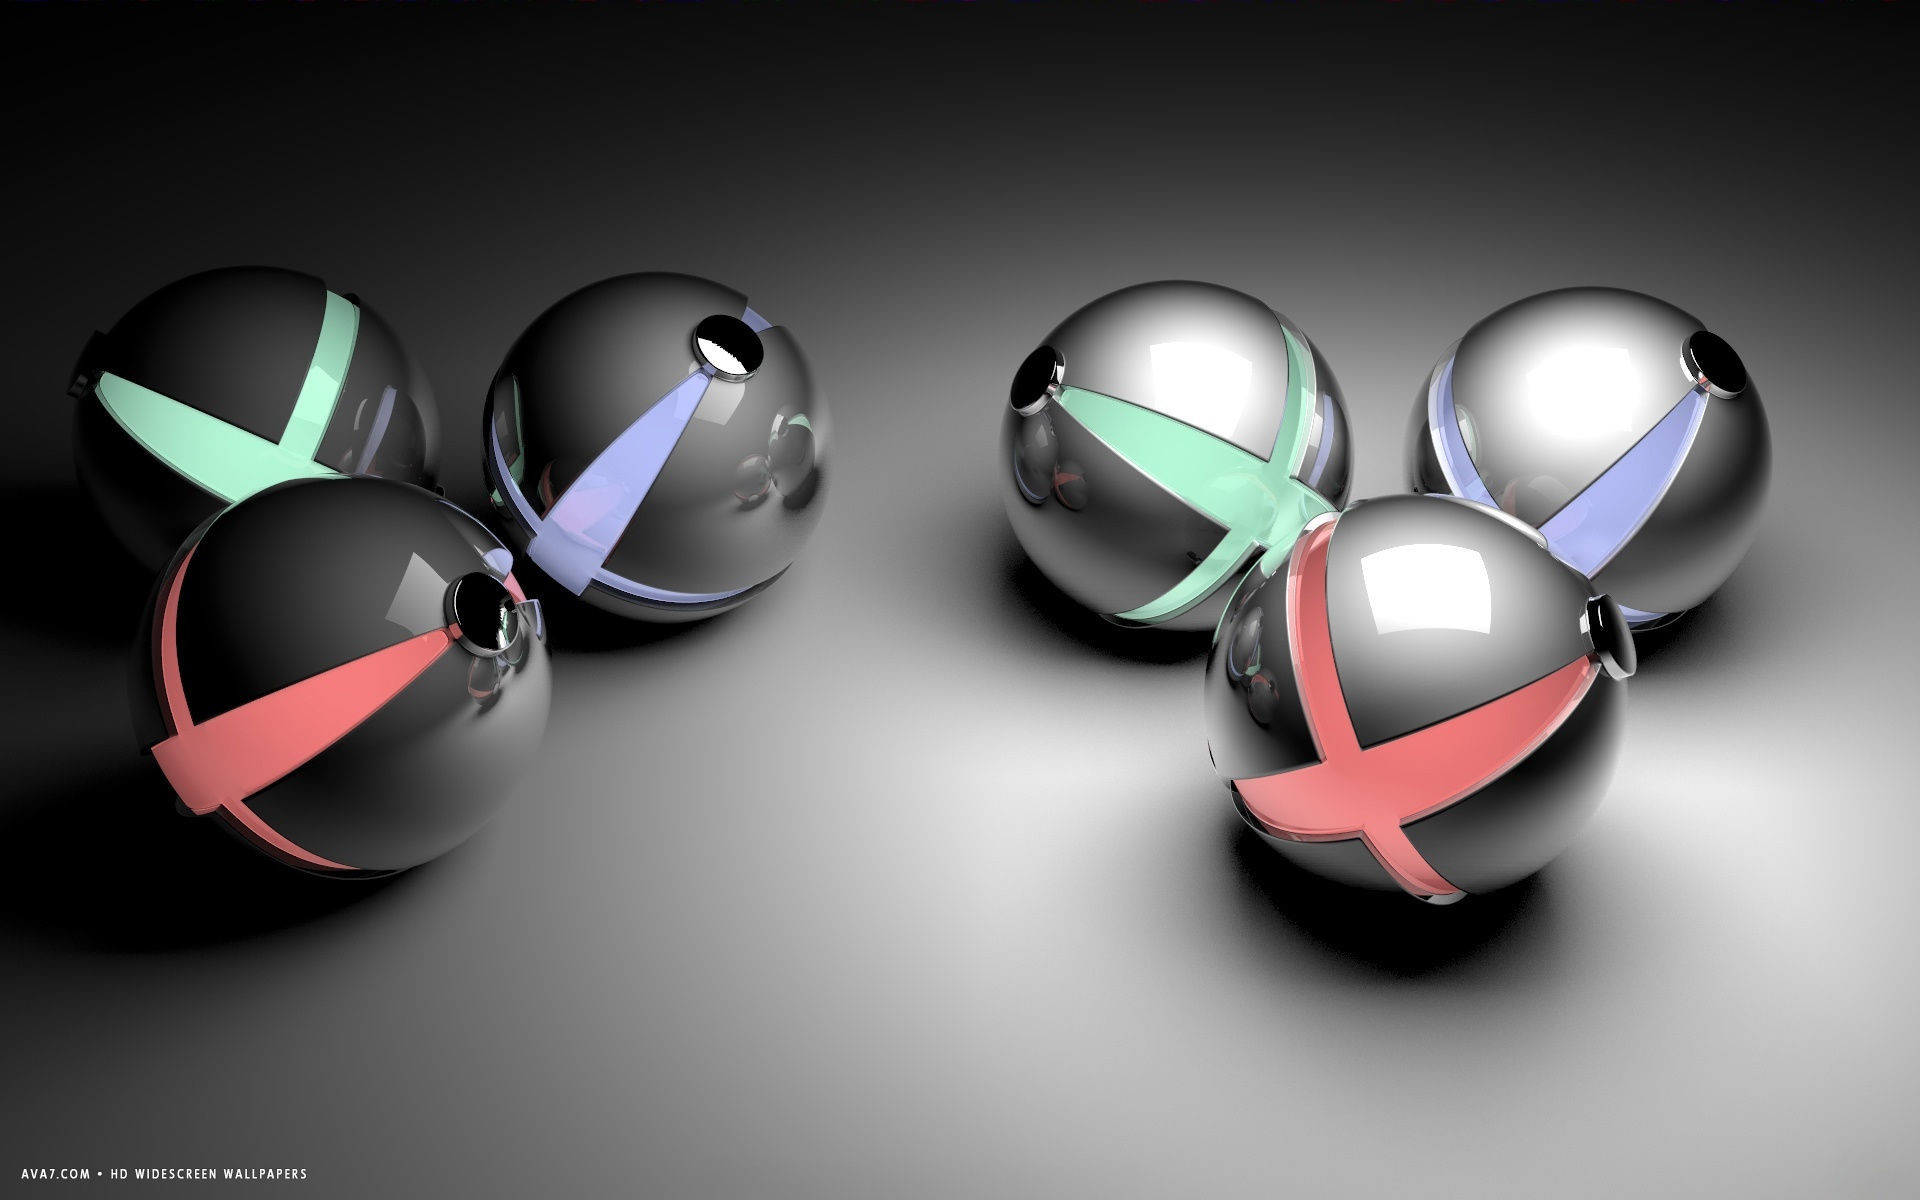 1920x1200 3d abstract red green plus blue reflective balls